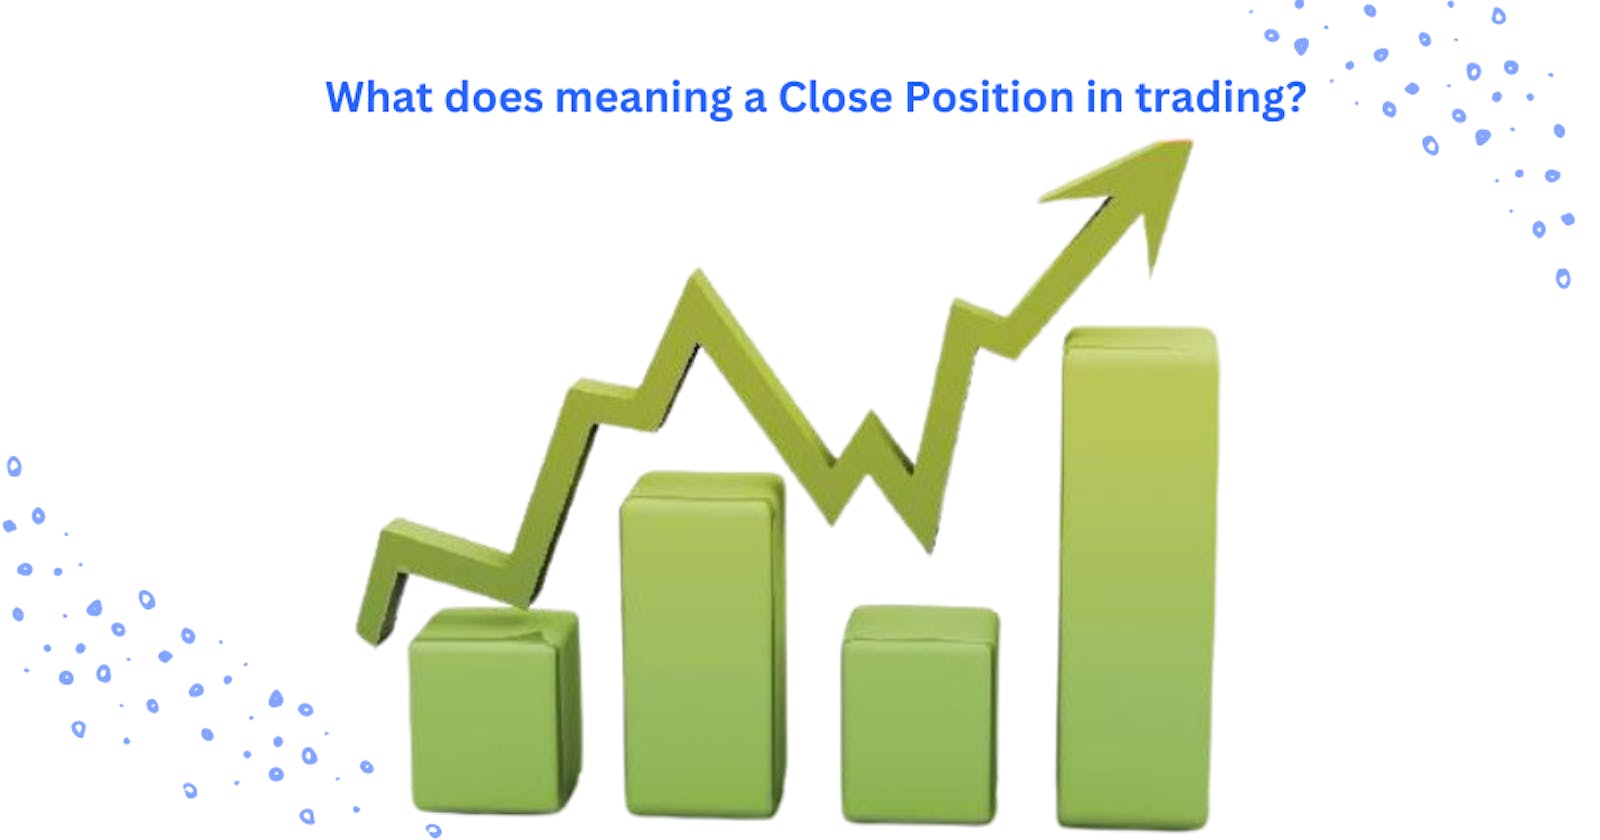 What does meaning a Close Position in trading?